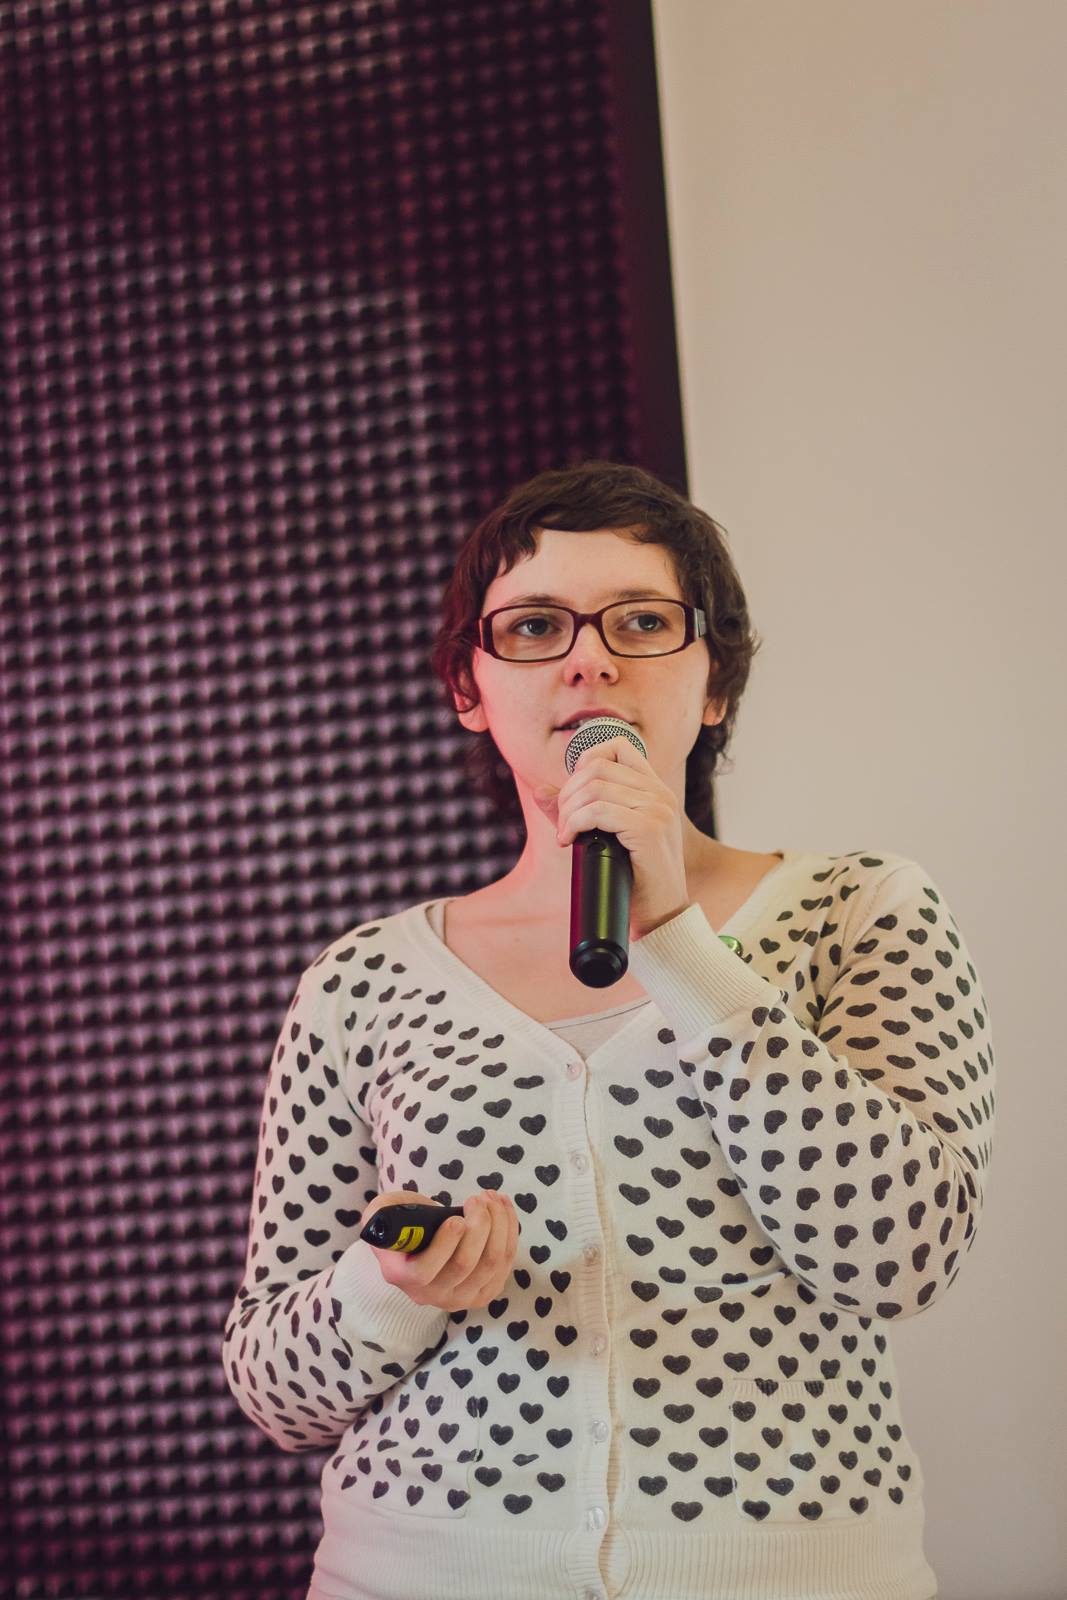 A photo of me standing on stage at Rails Girls Warsaw, explaining how a Ruby on Rails app is like a bento box.